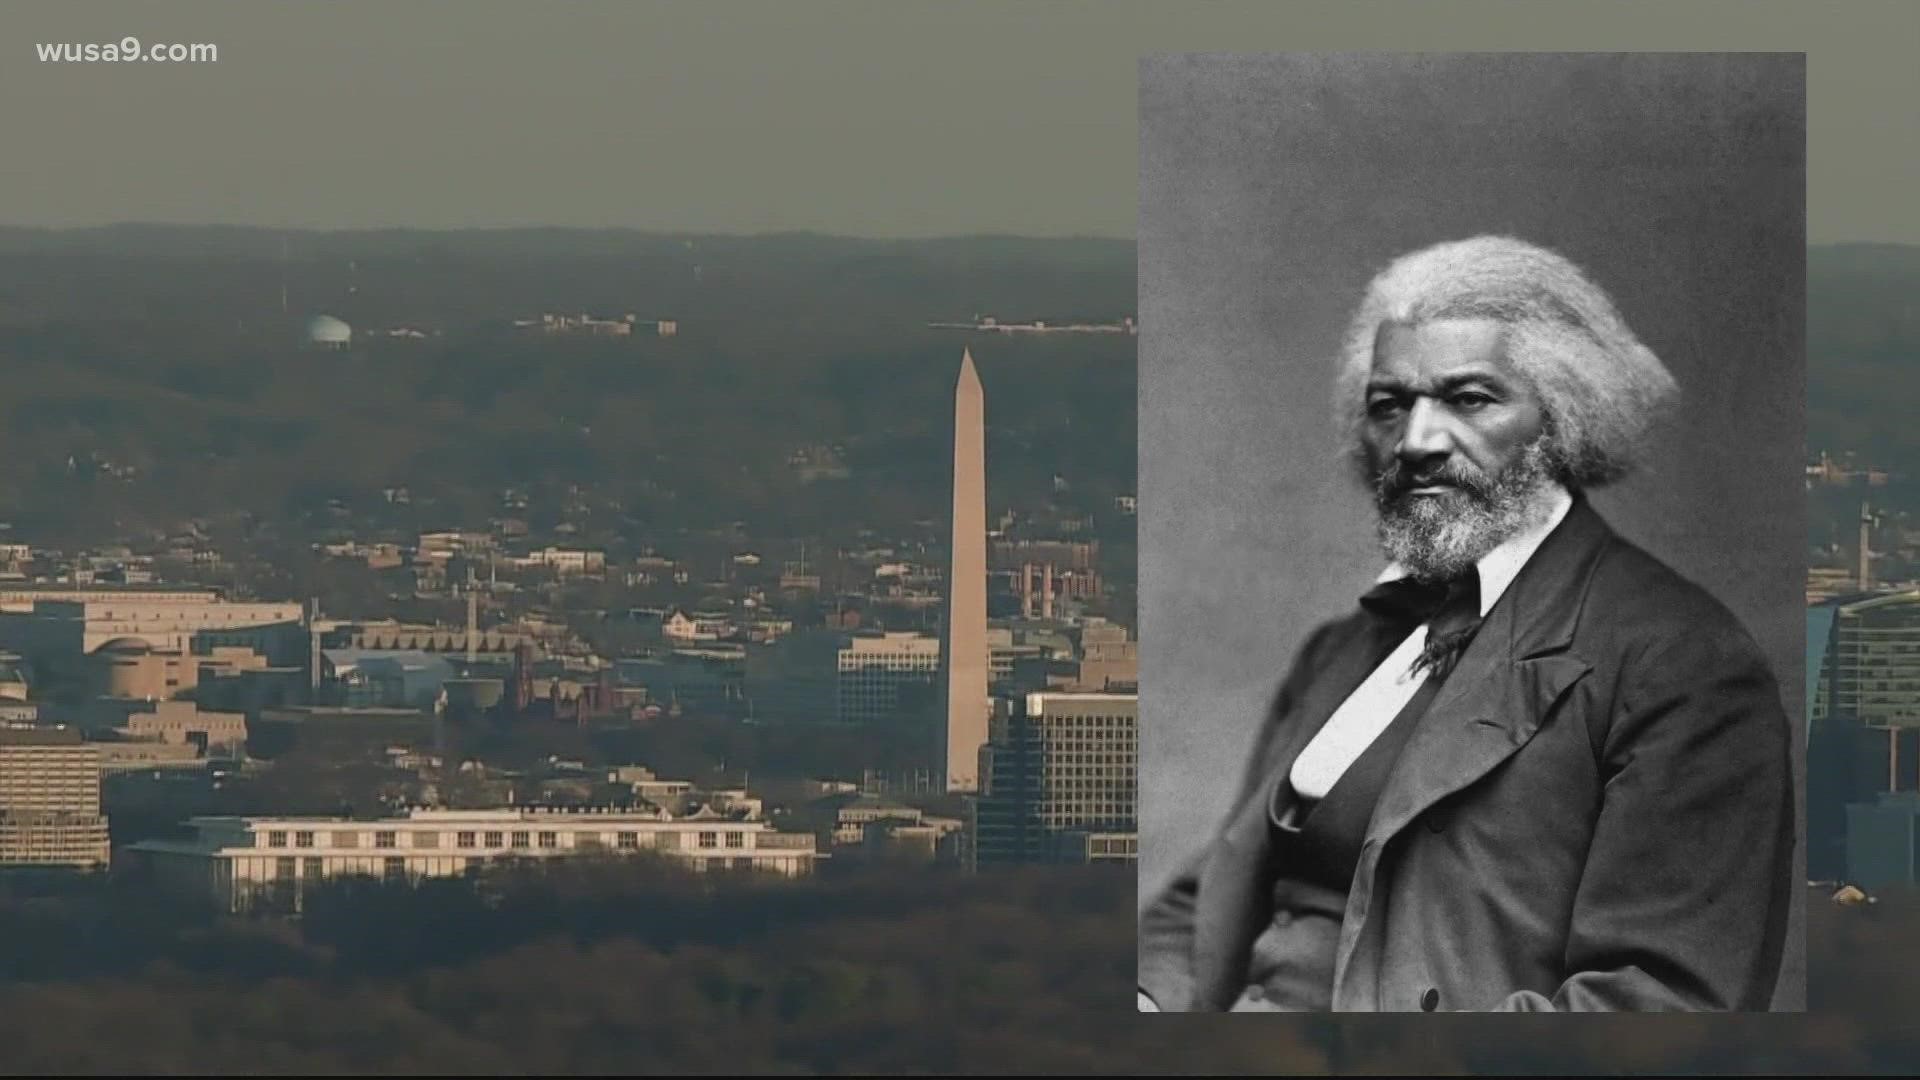 WUSA9's Reese Waters breaks down key moments that happened today in history.